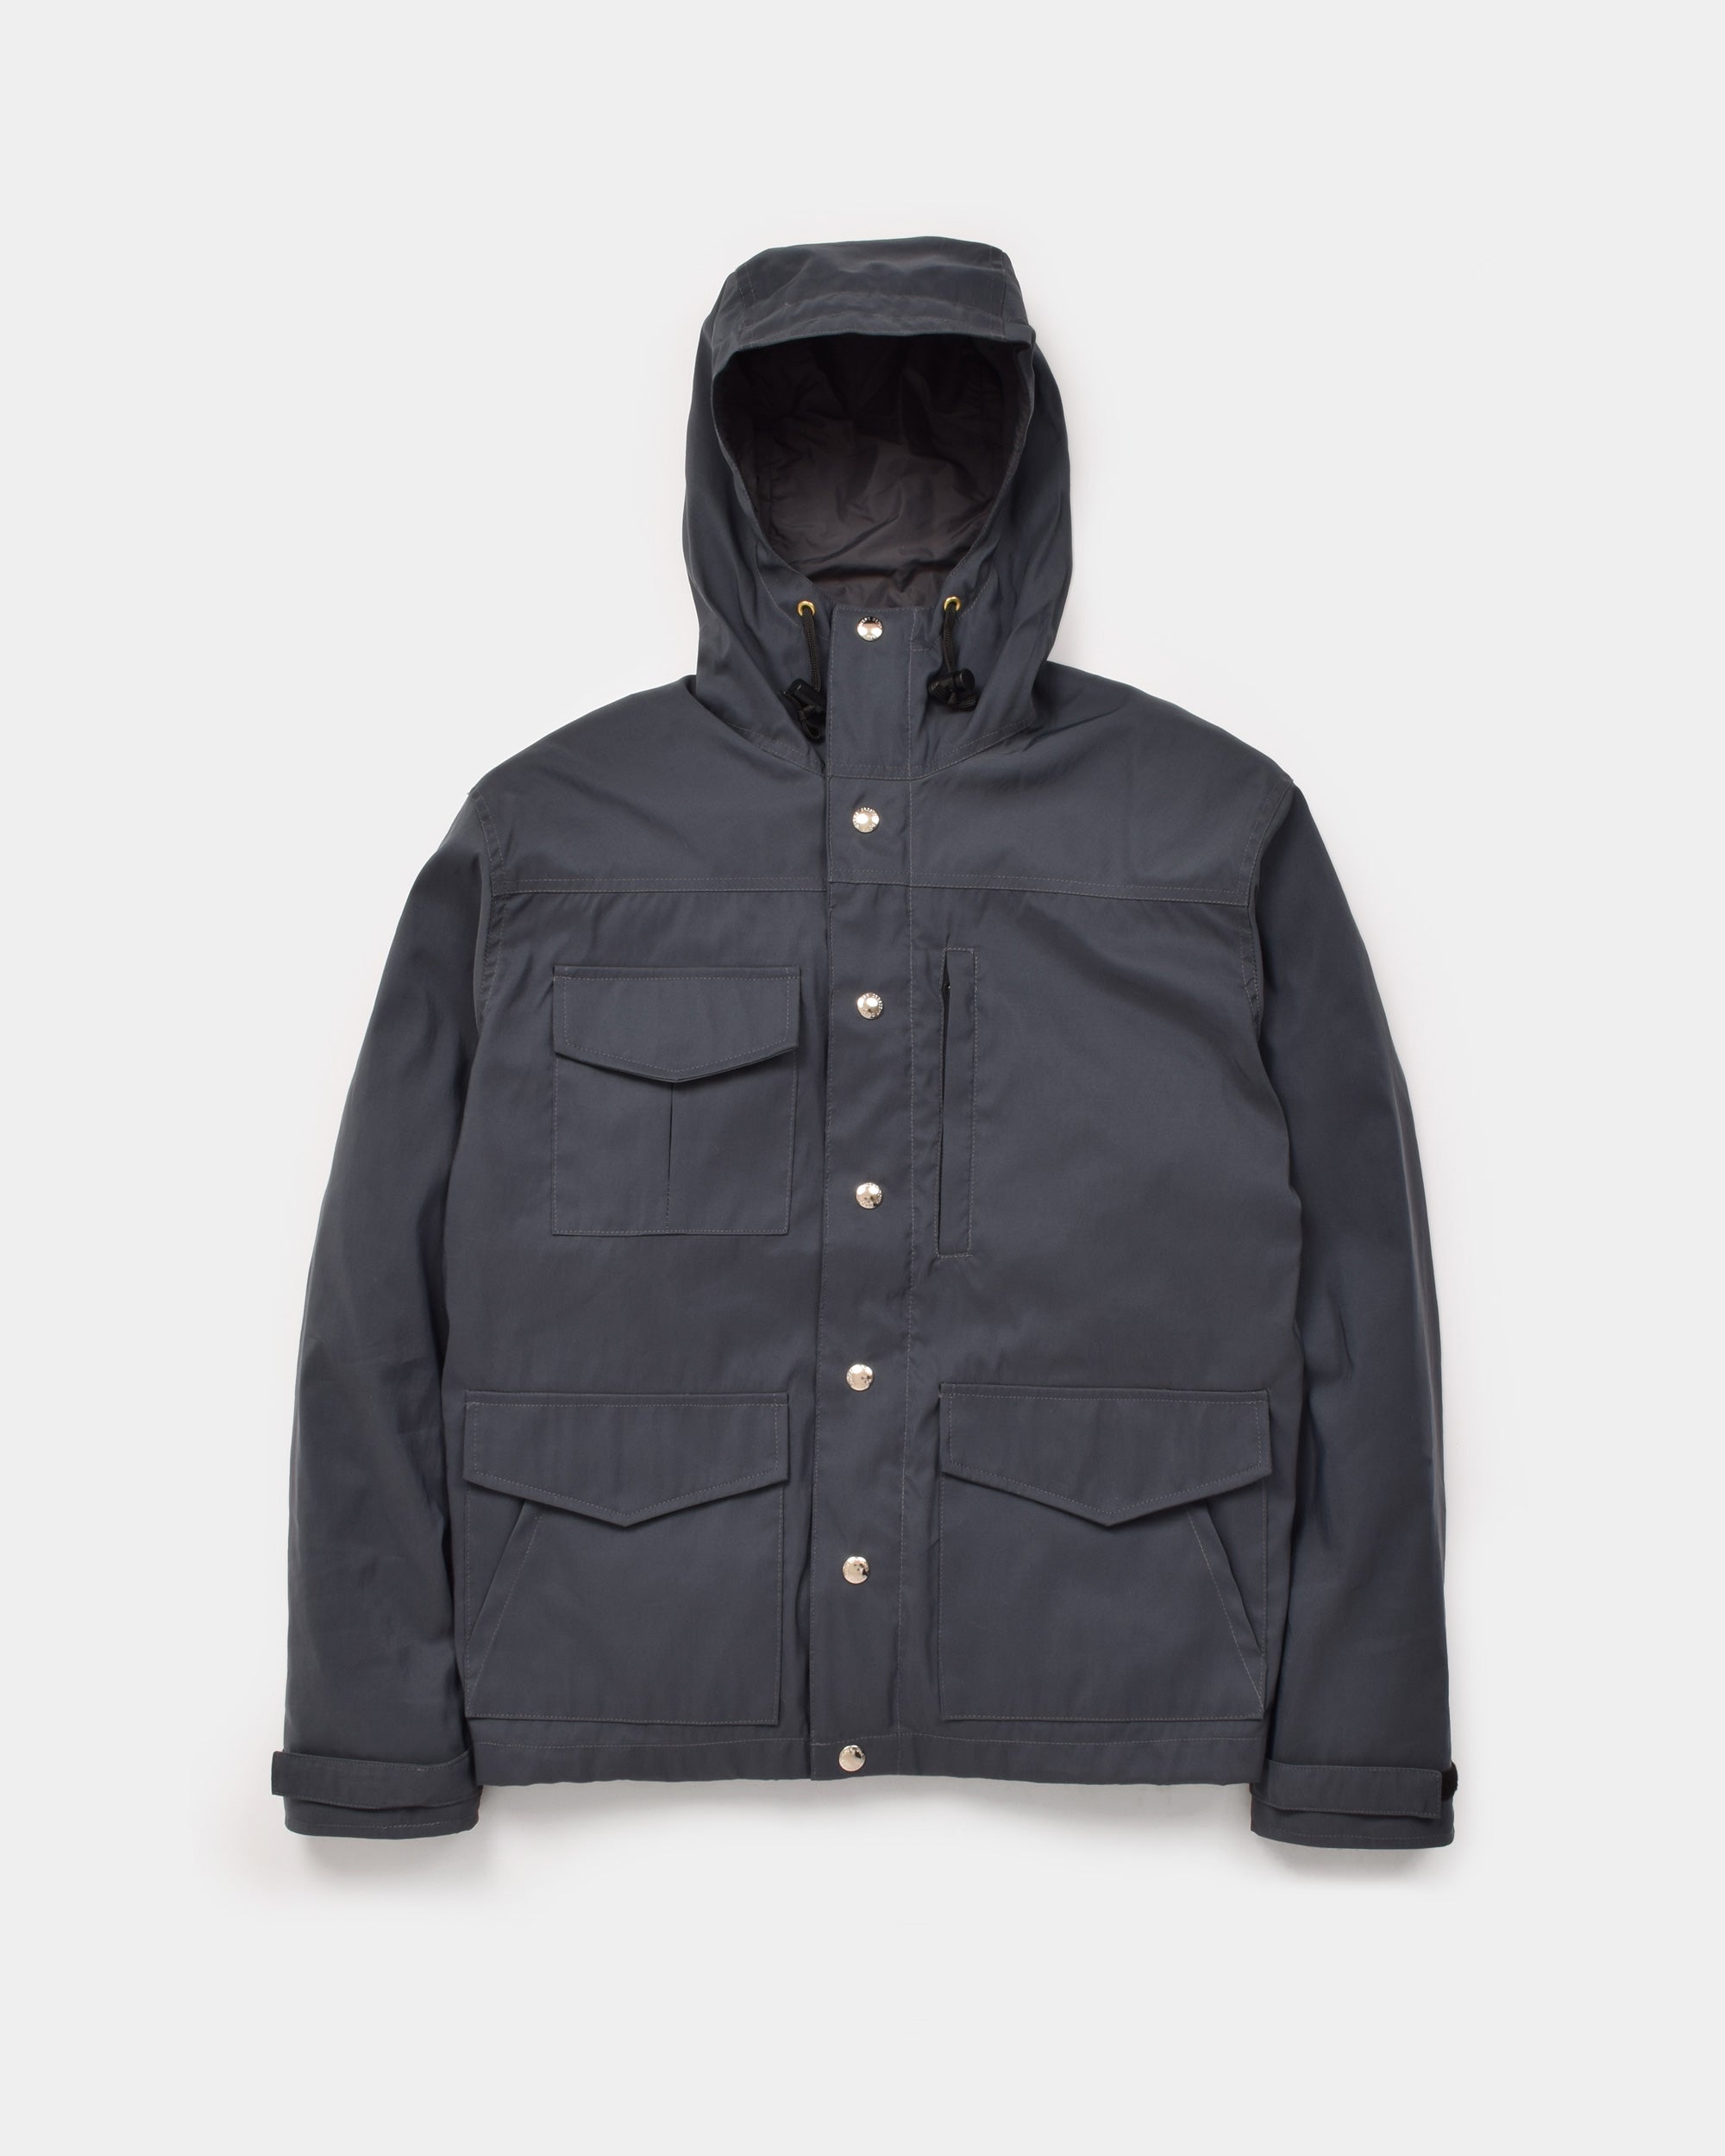 Michi Jacket in Charcoal showing the front